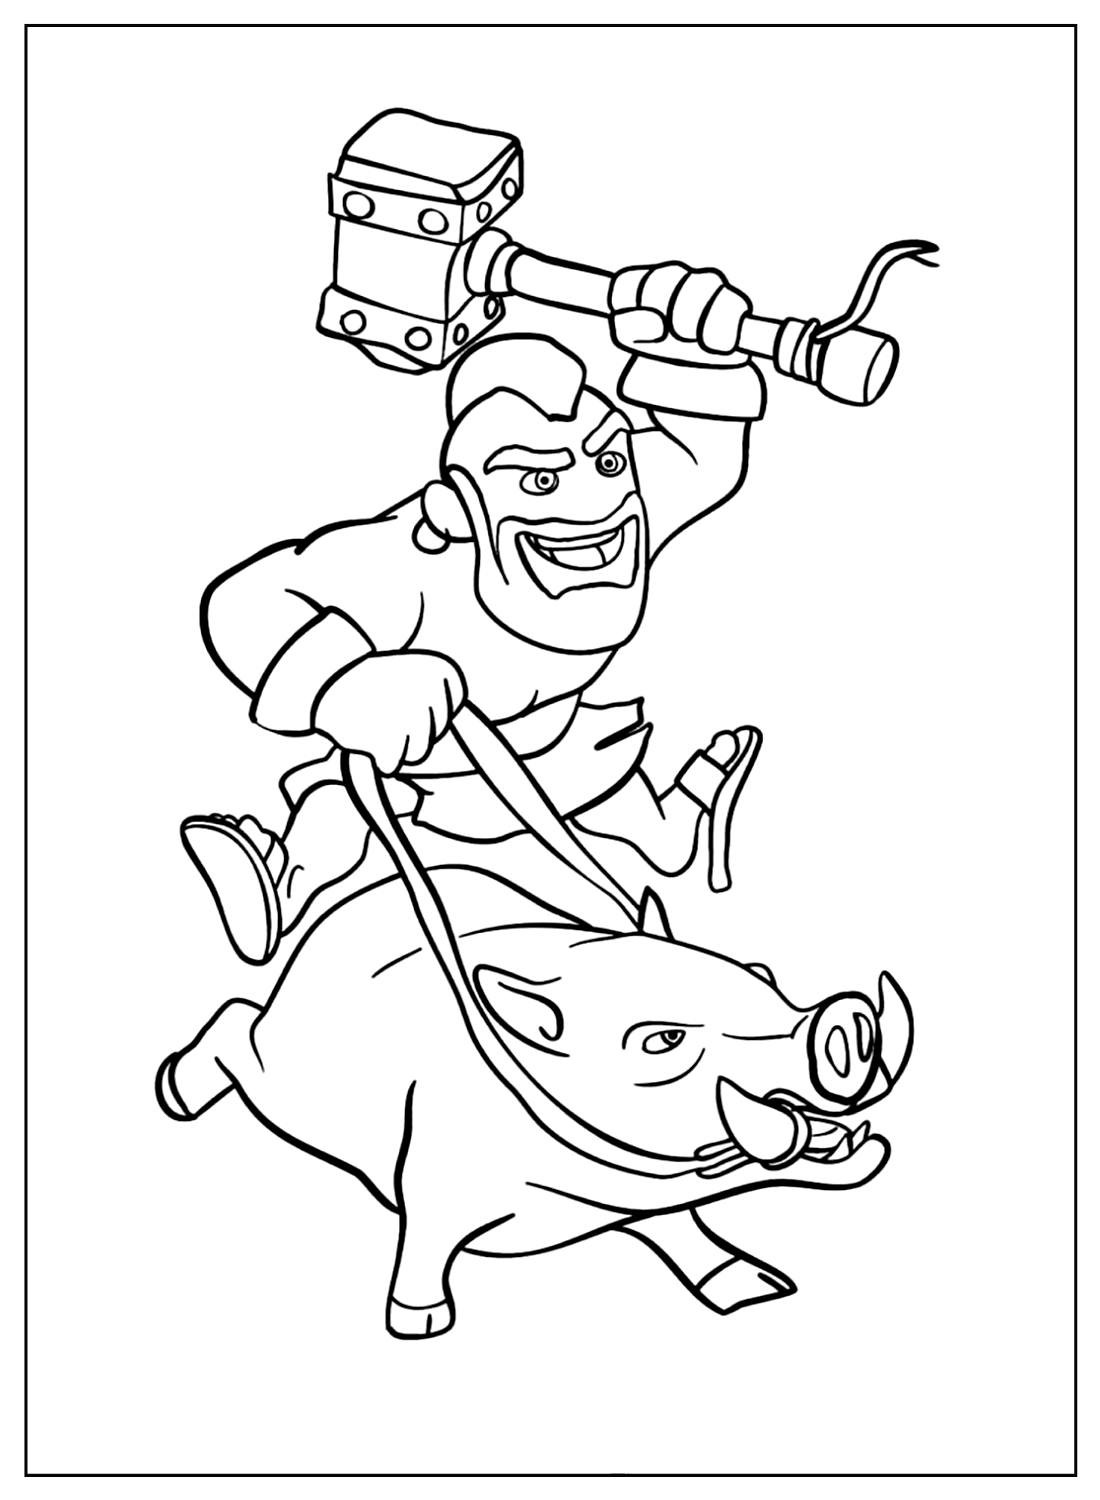 Clash of Clans Coloring Pages Printable from Clash of Clans